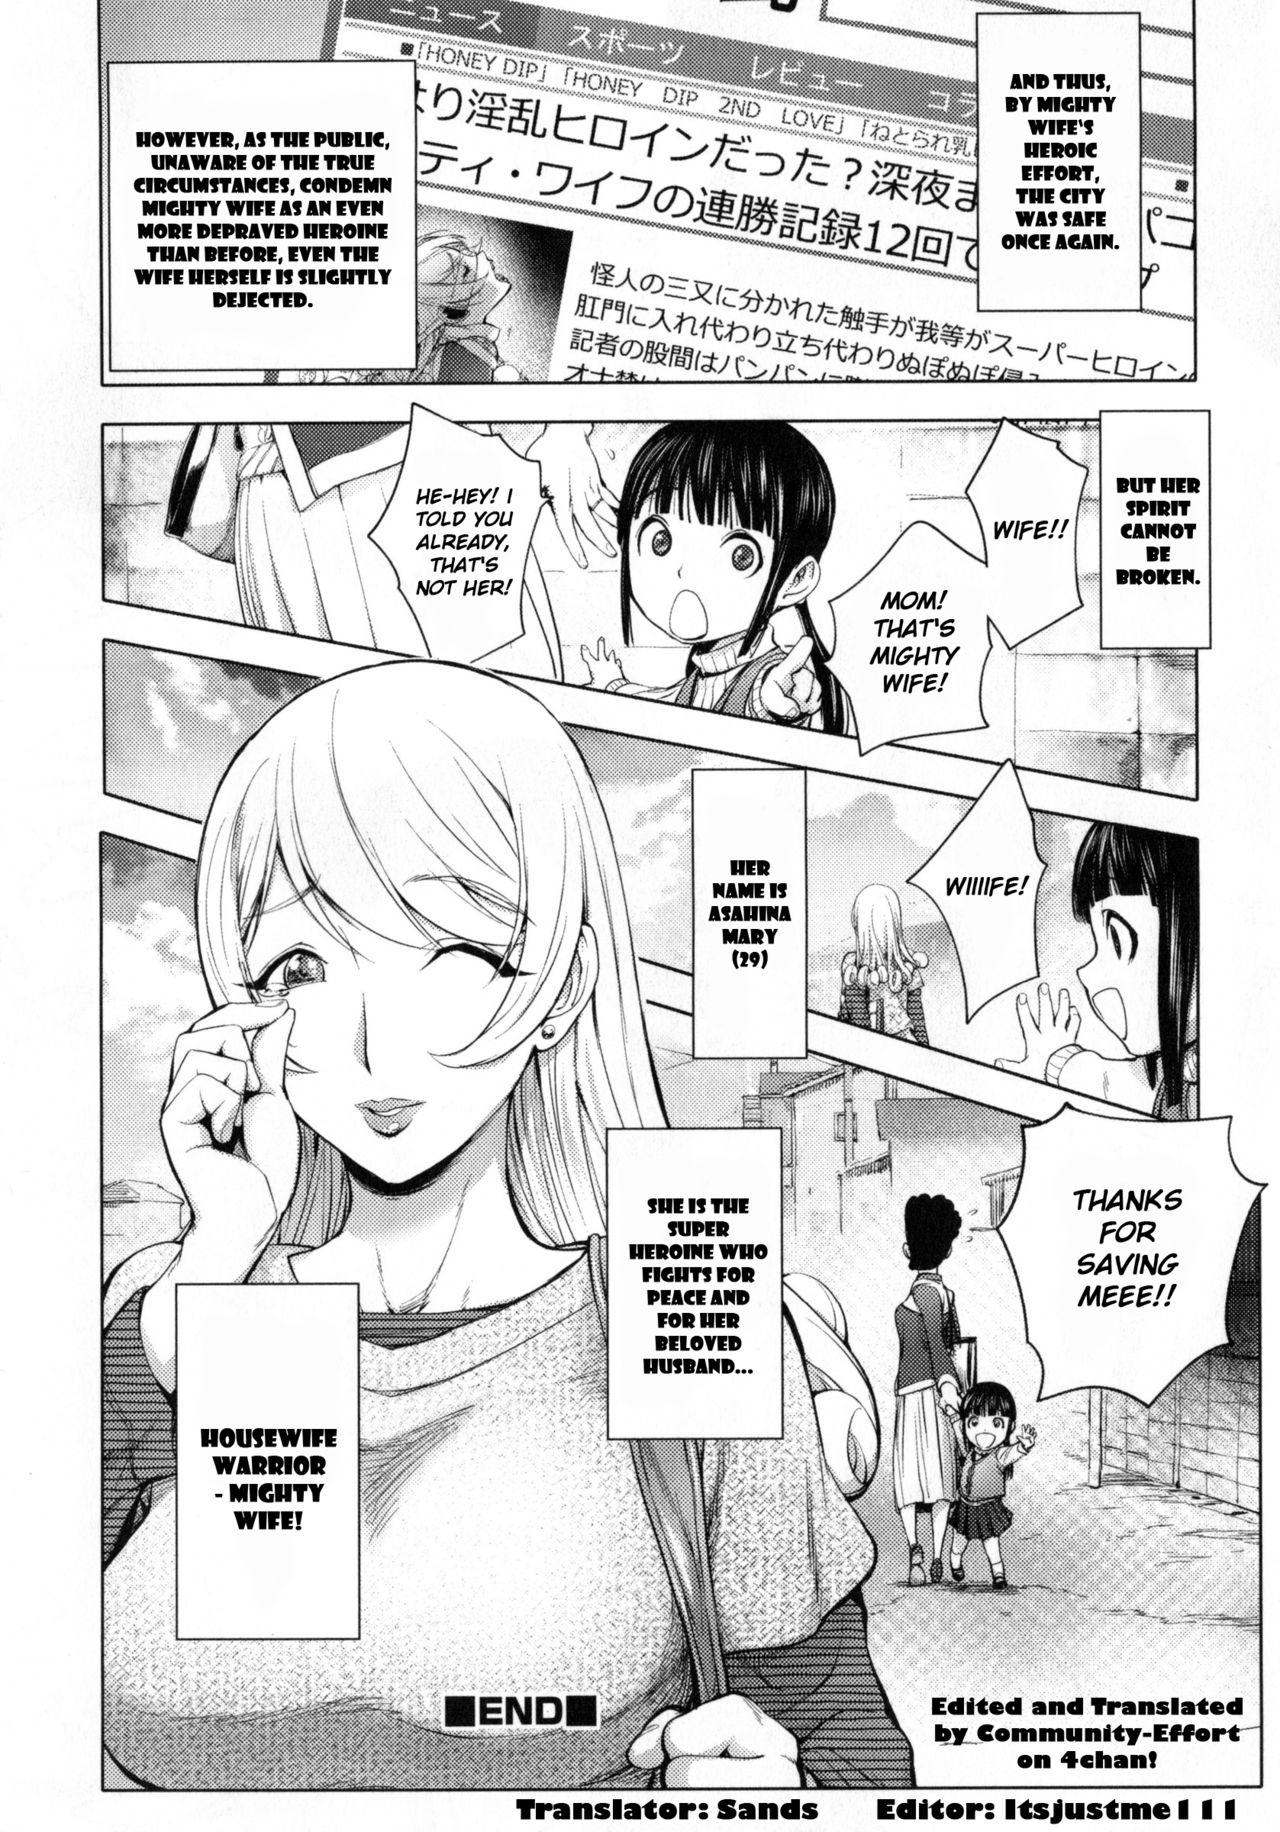 Gostoso Aisai Senshi Mighty Wife 8th | Beloved Housewife Warrior Mighty Wife 8th This - Page 19